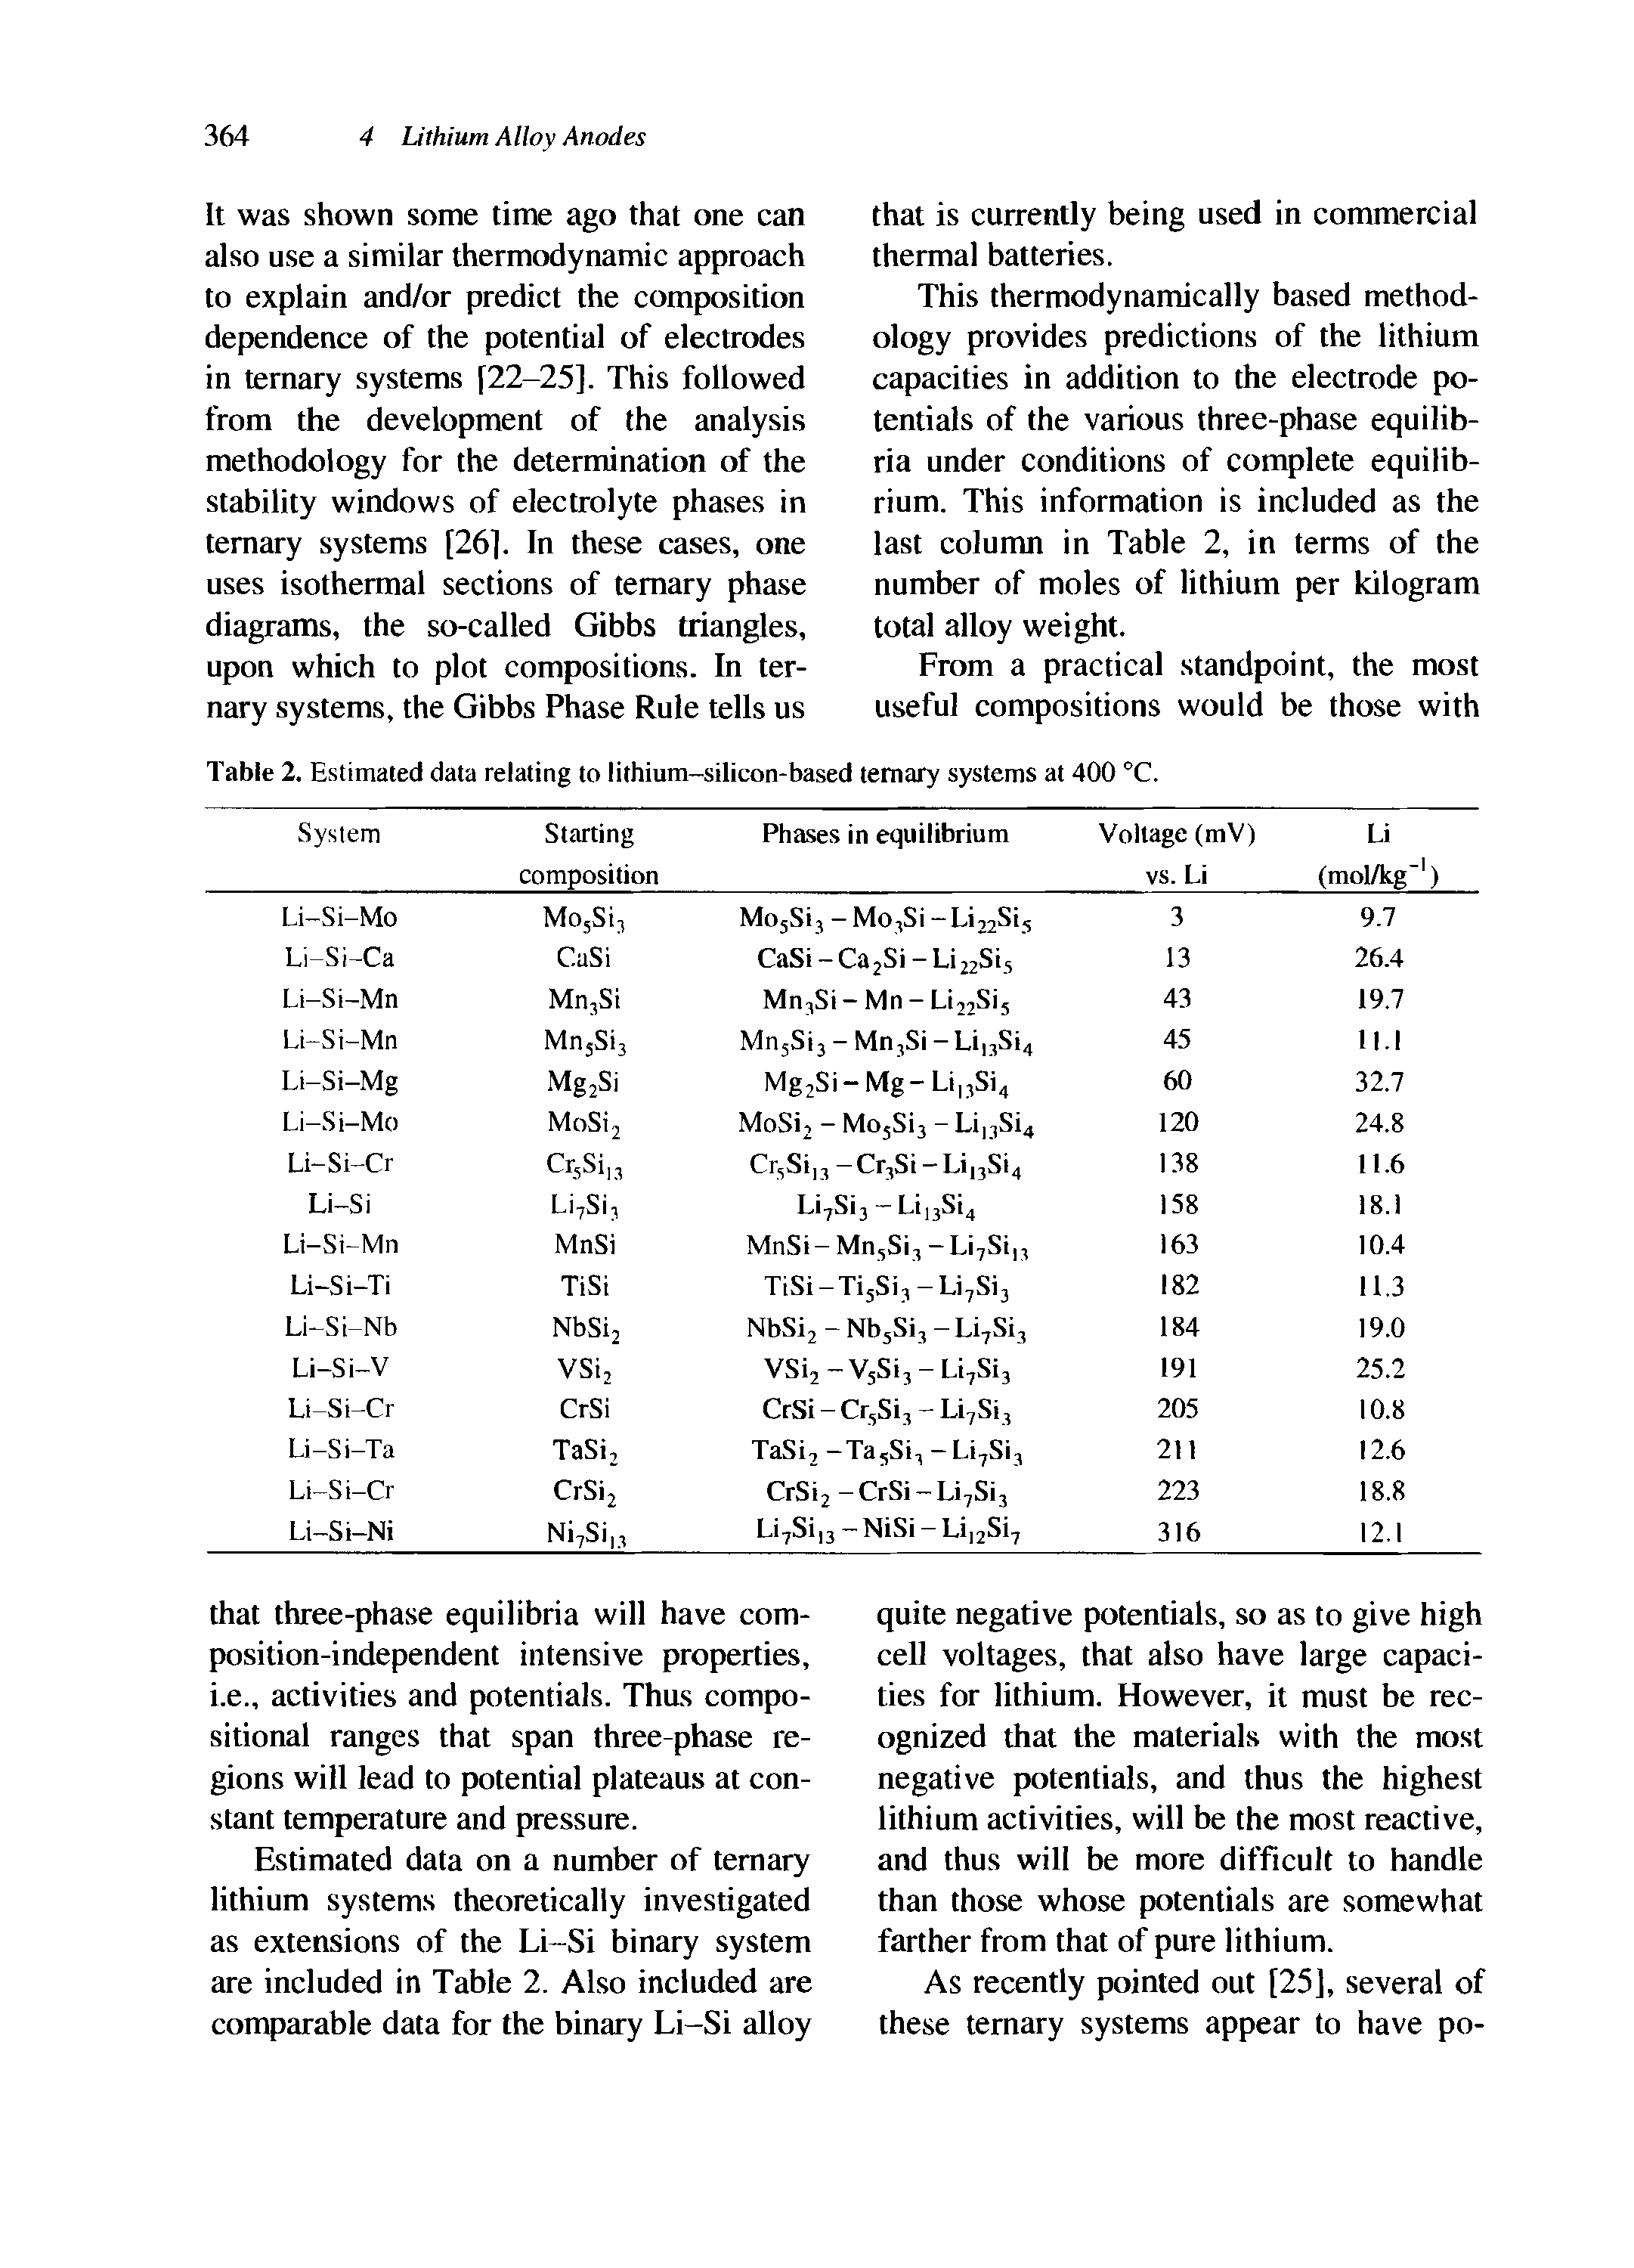 Table 2. Estimated data relating to lithium-silicon-based ternary systems at 400 °C.